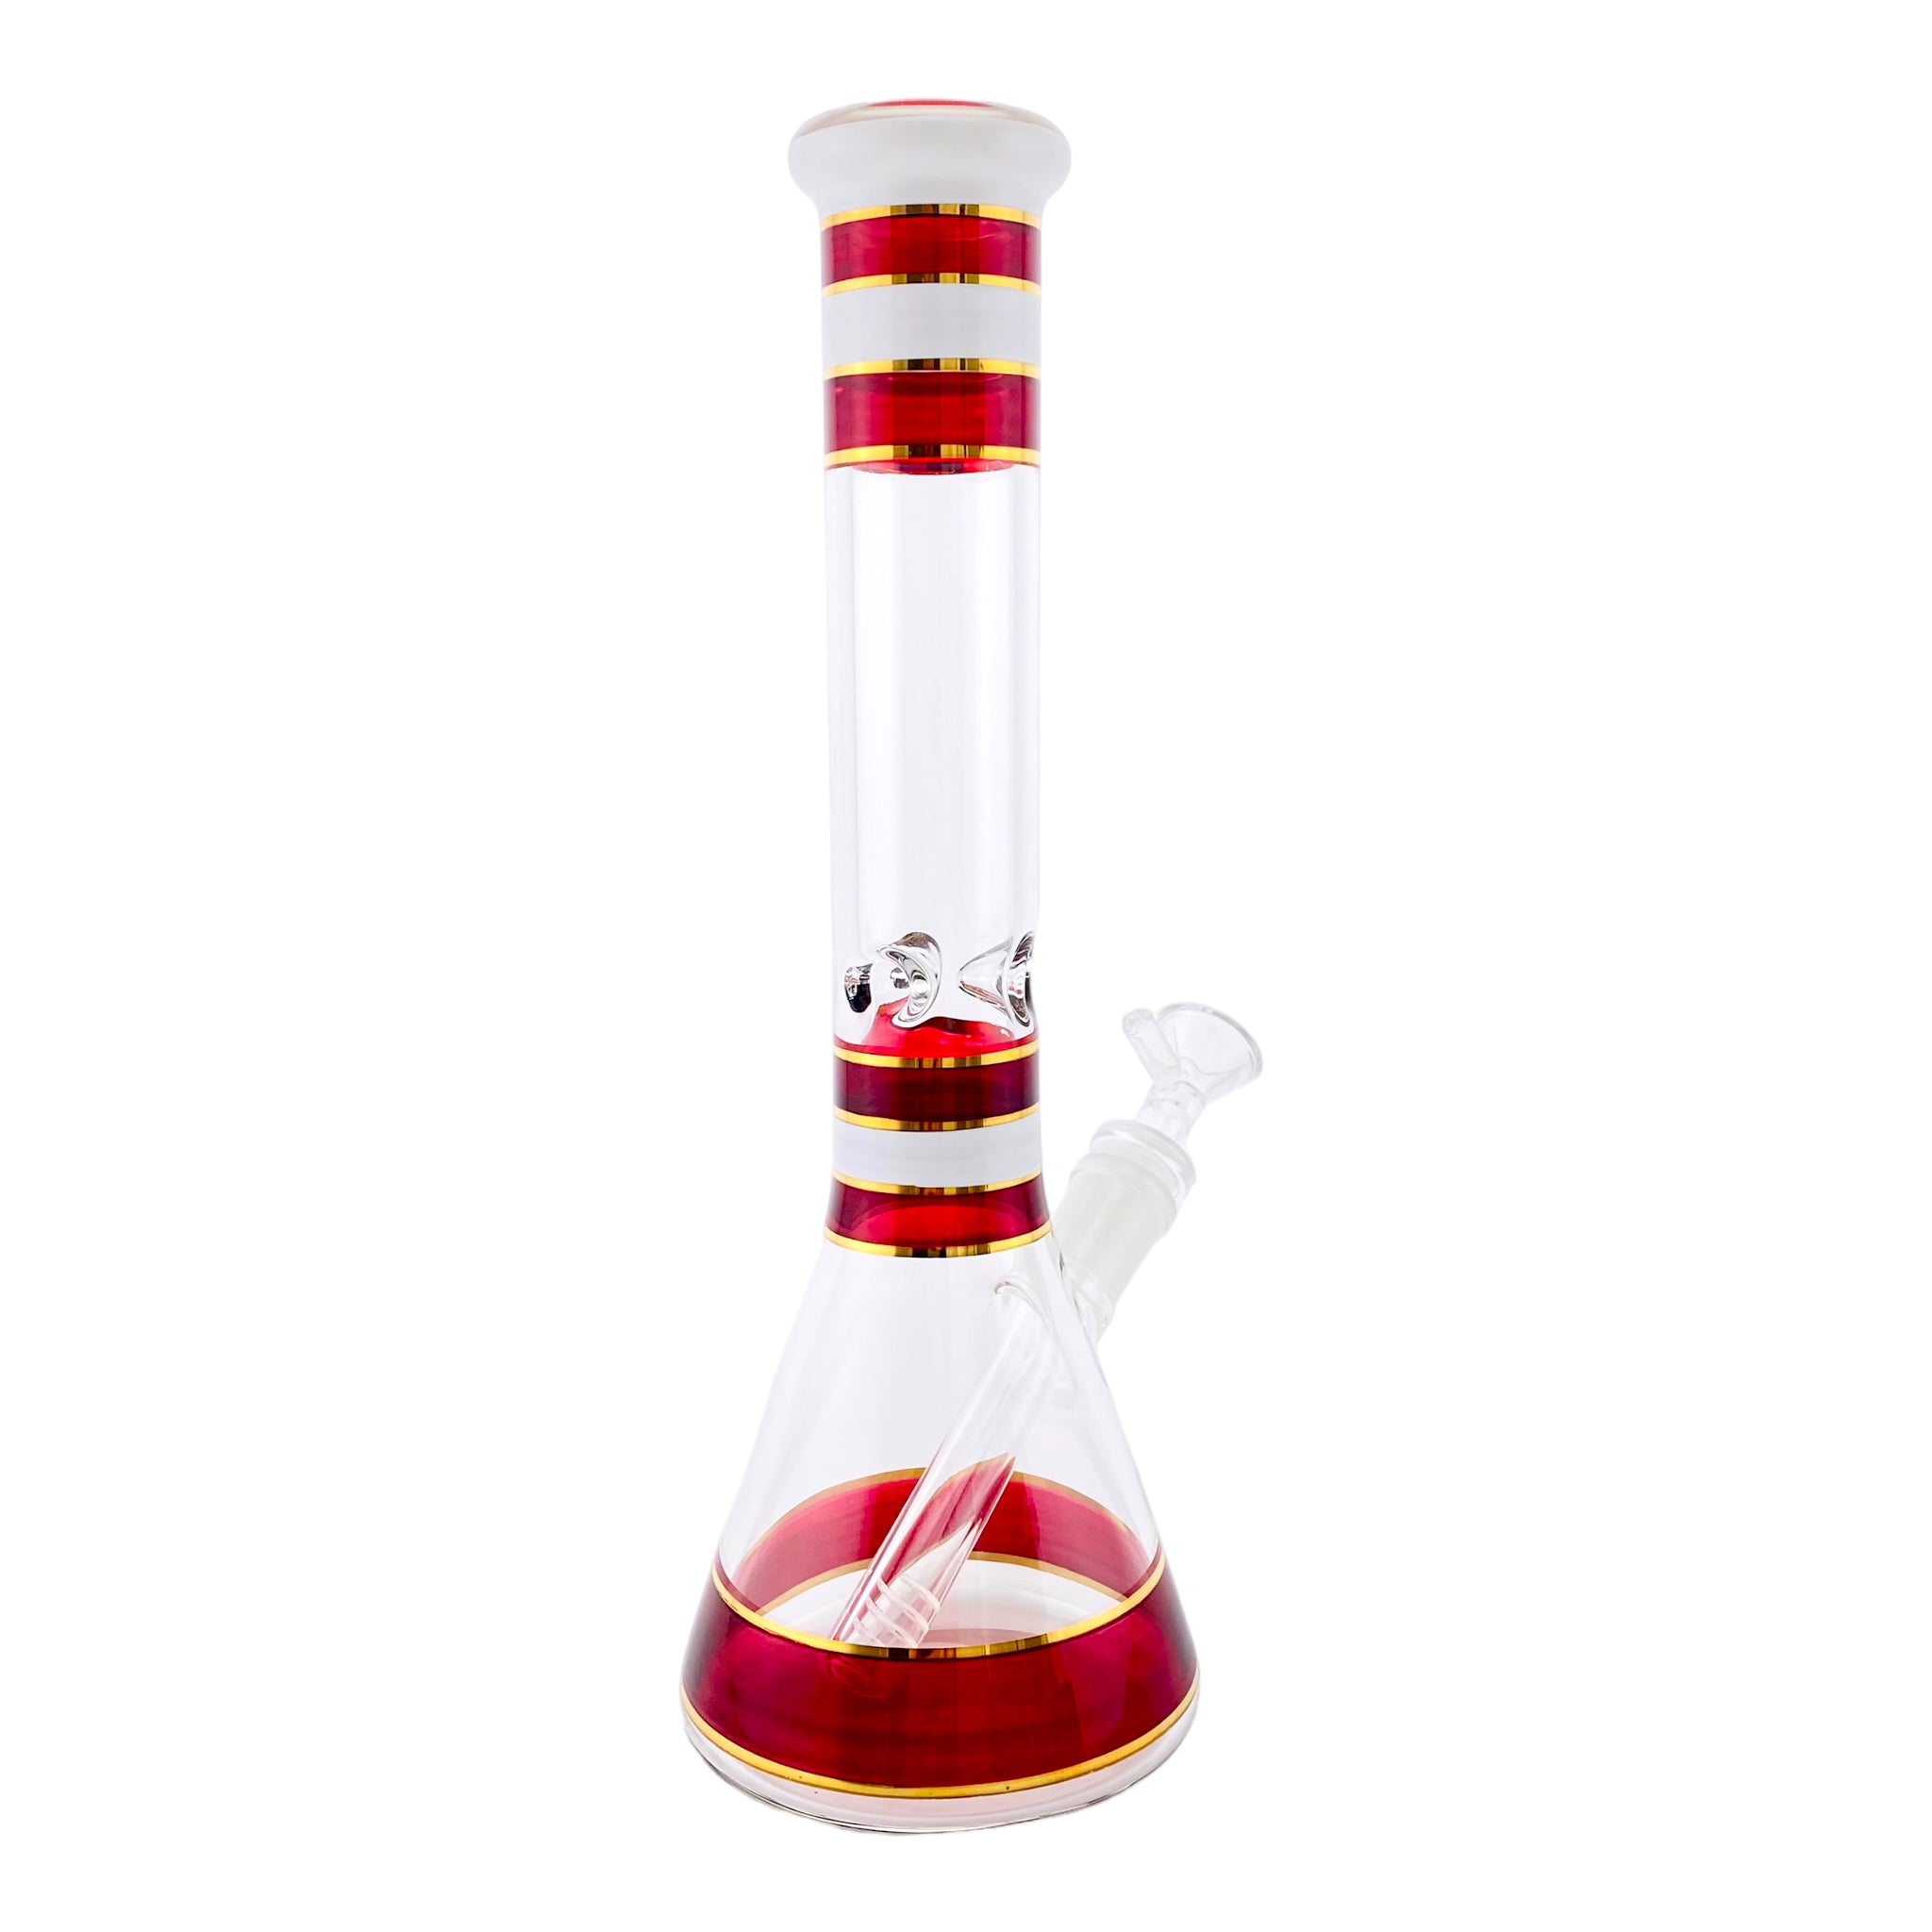 12 Inch Glass Beaker Bong With Red, White, And Gold Accents